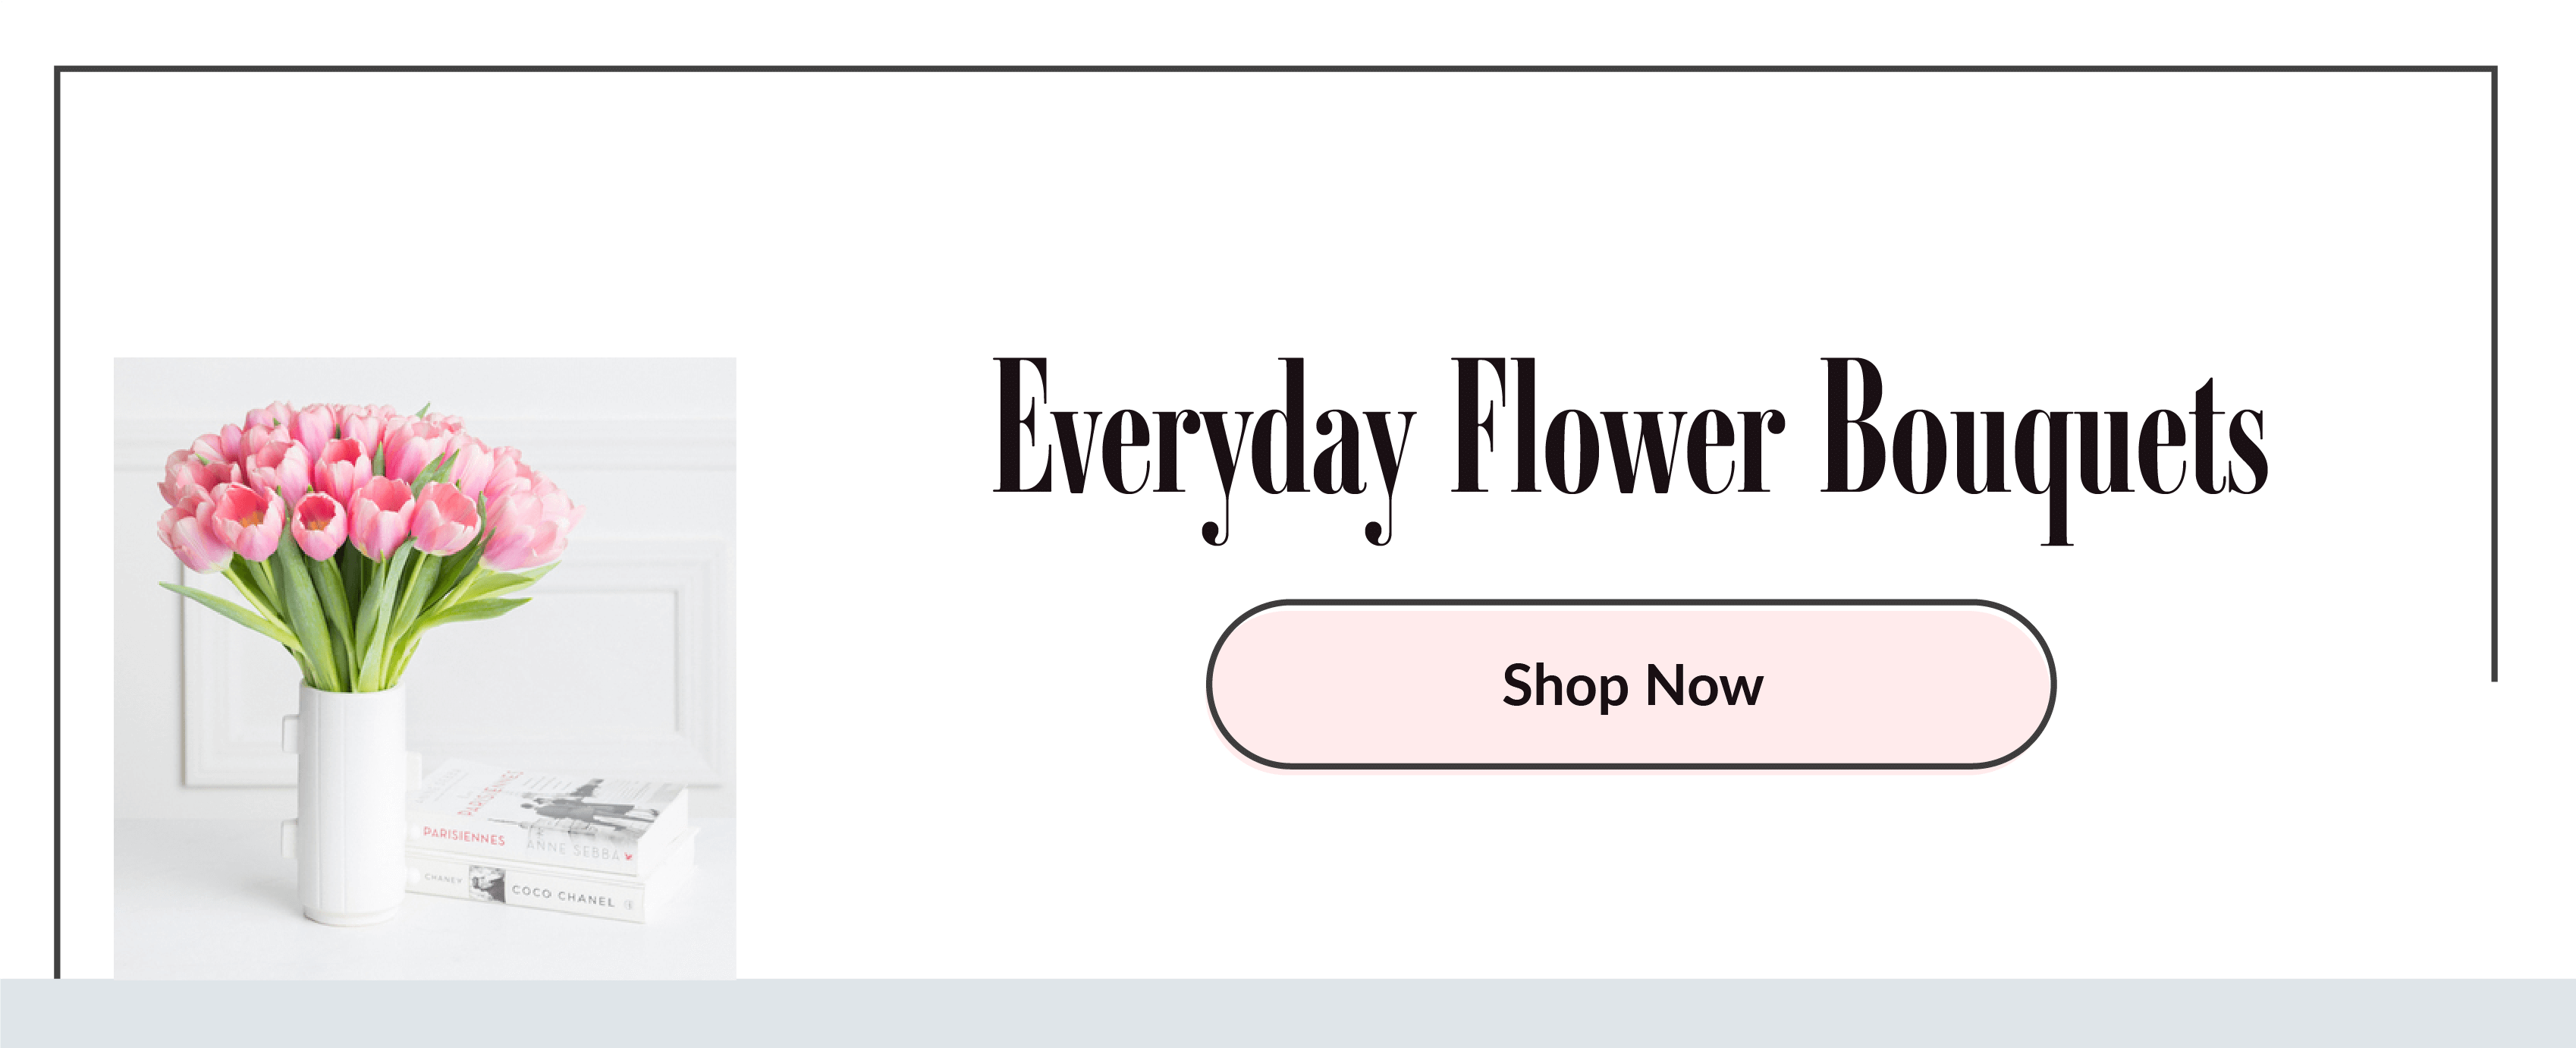 Everyday Flower Bouquets